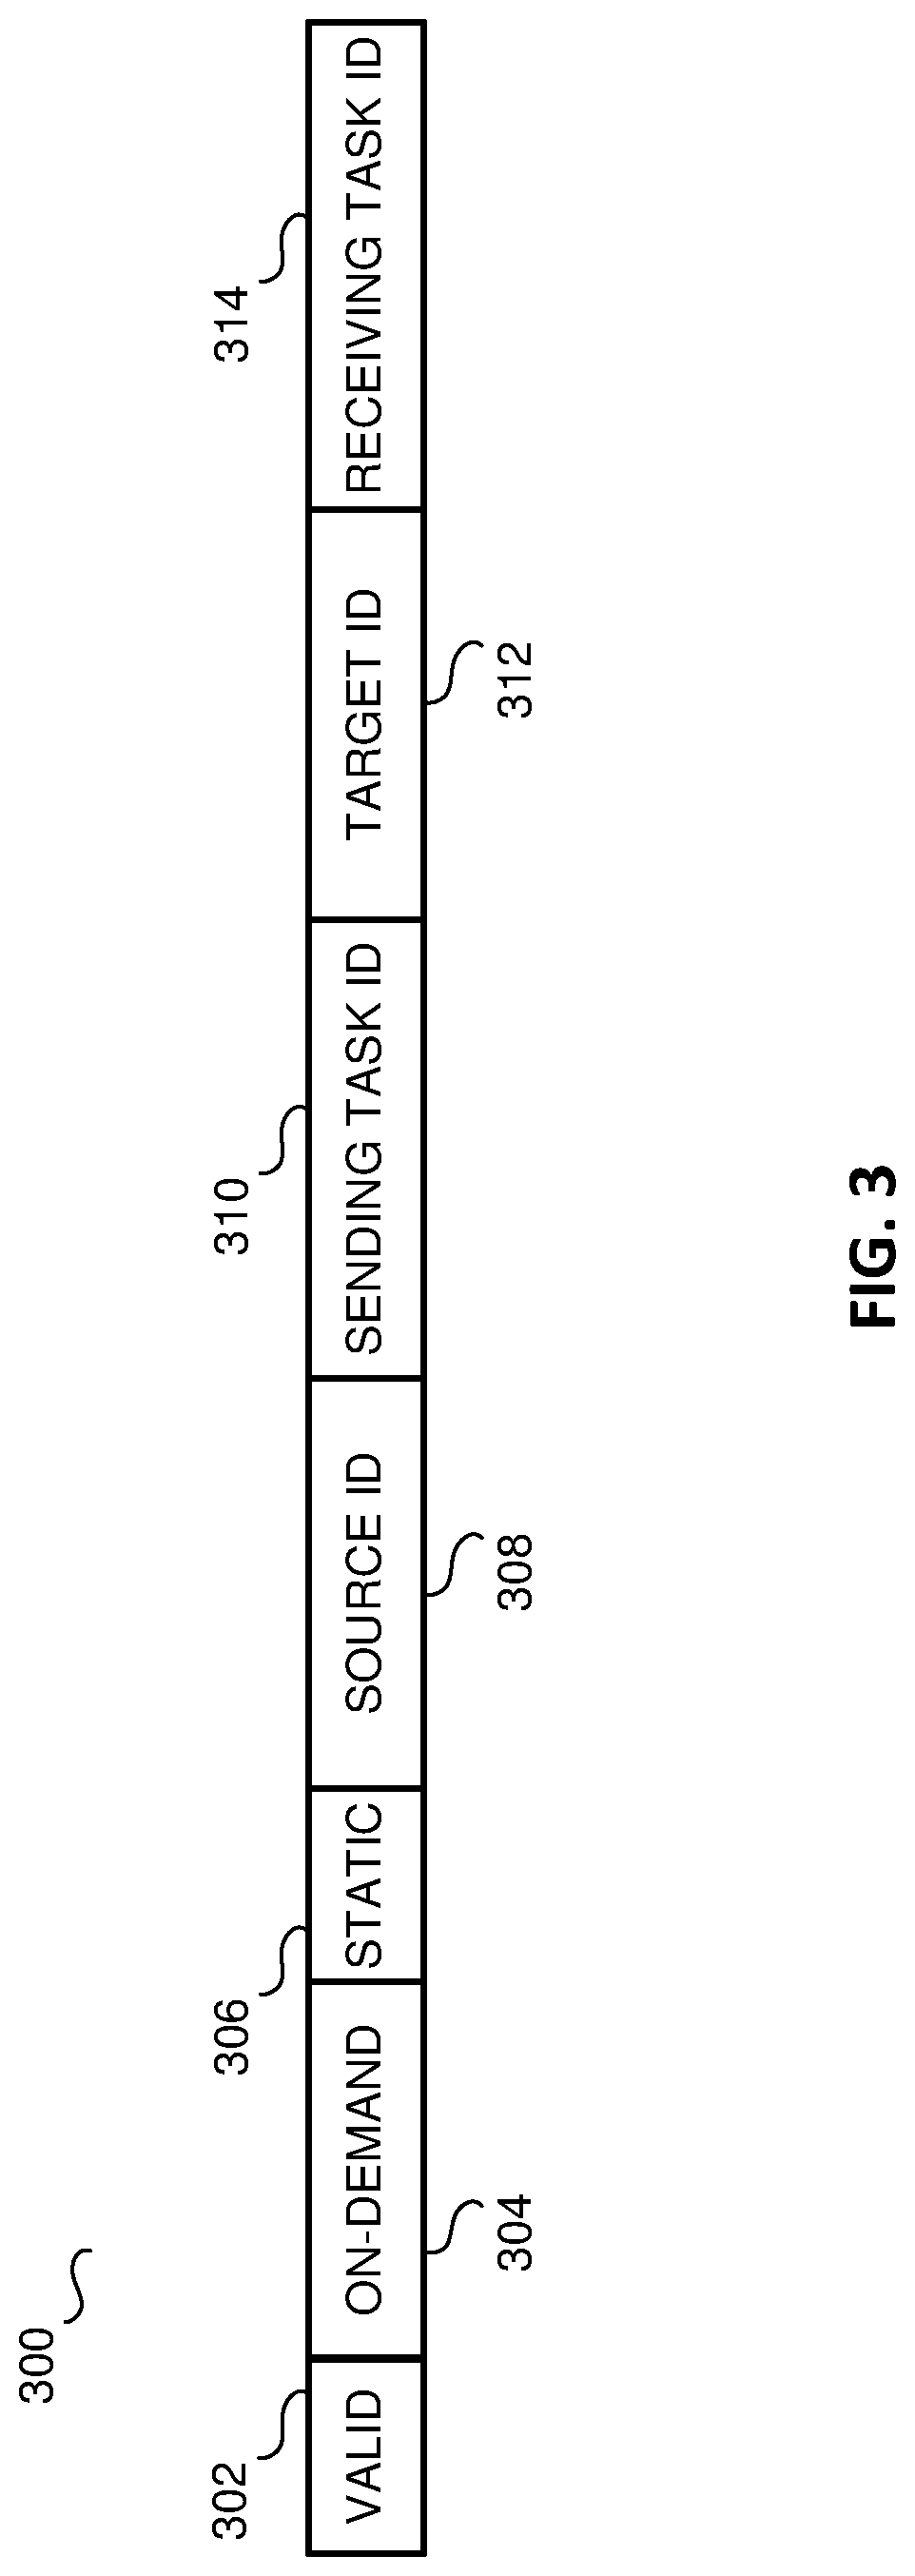 Apparatus and method for performance state matching between source and target processors based on interprocessor interrputs